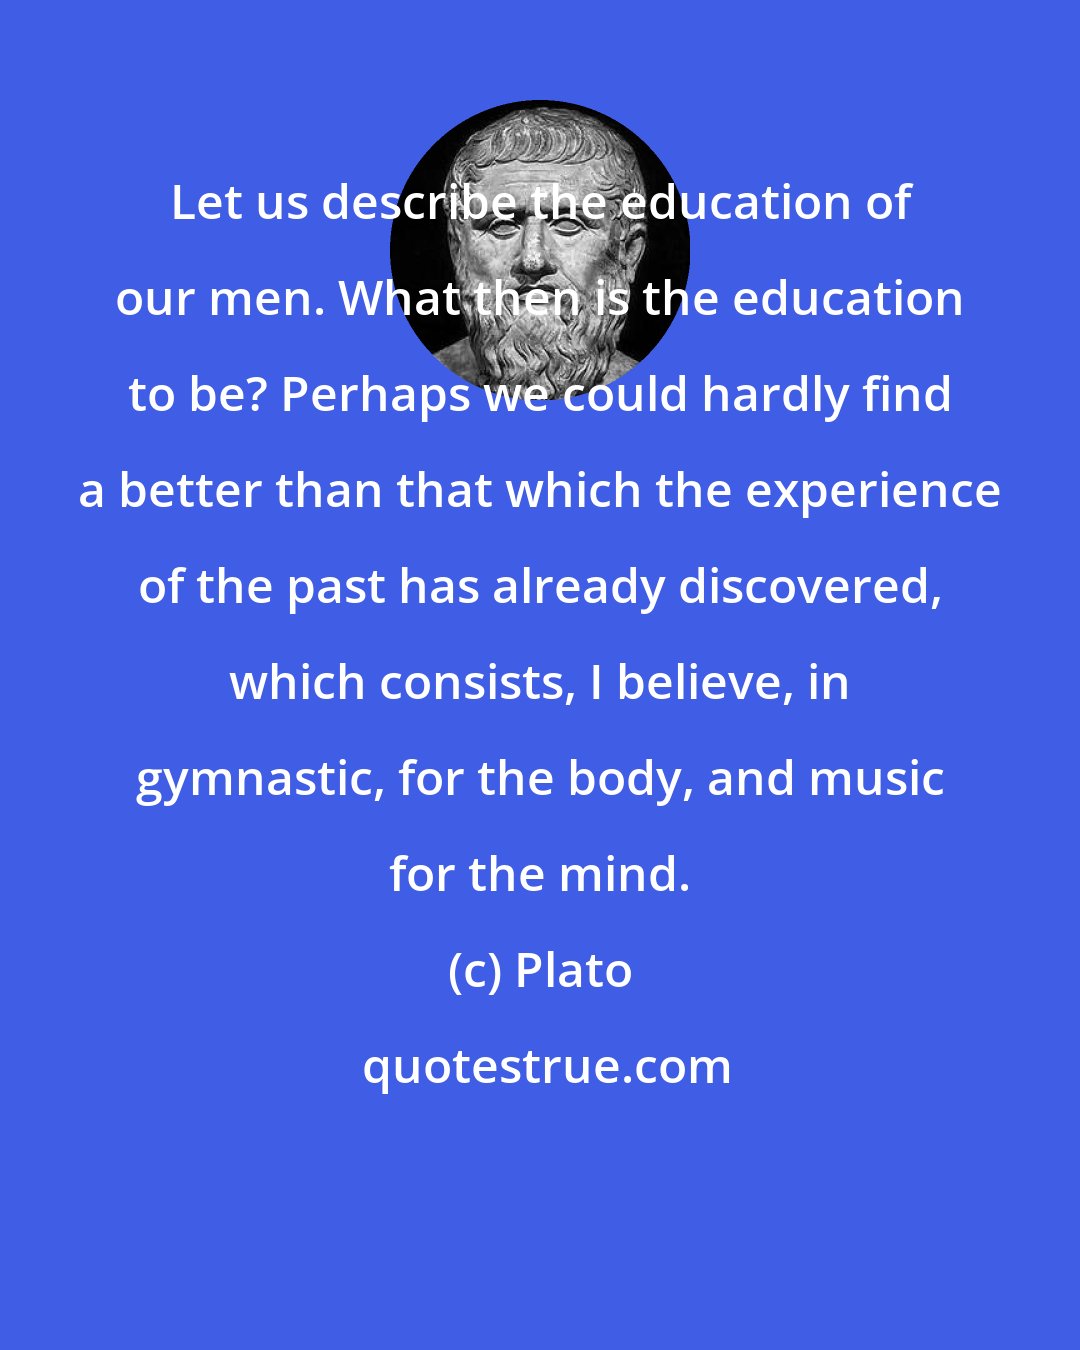 Plato: Let us describe the education of our men. What then is the education to be? Perhaps we could hardly find a better than that which the experience of the past has already discovered, which consists, I believe, in gymnastic, for the body, and music for the mind.